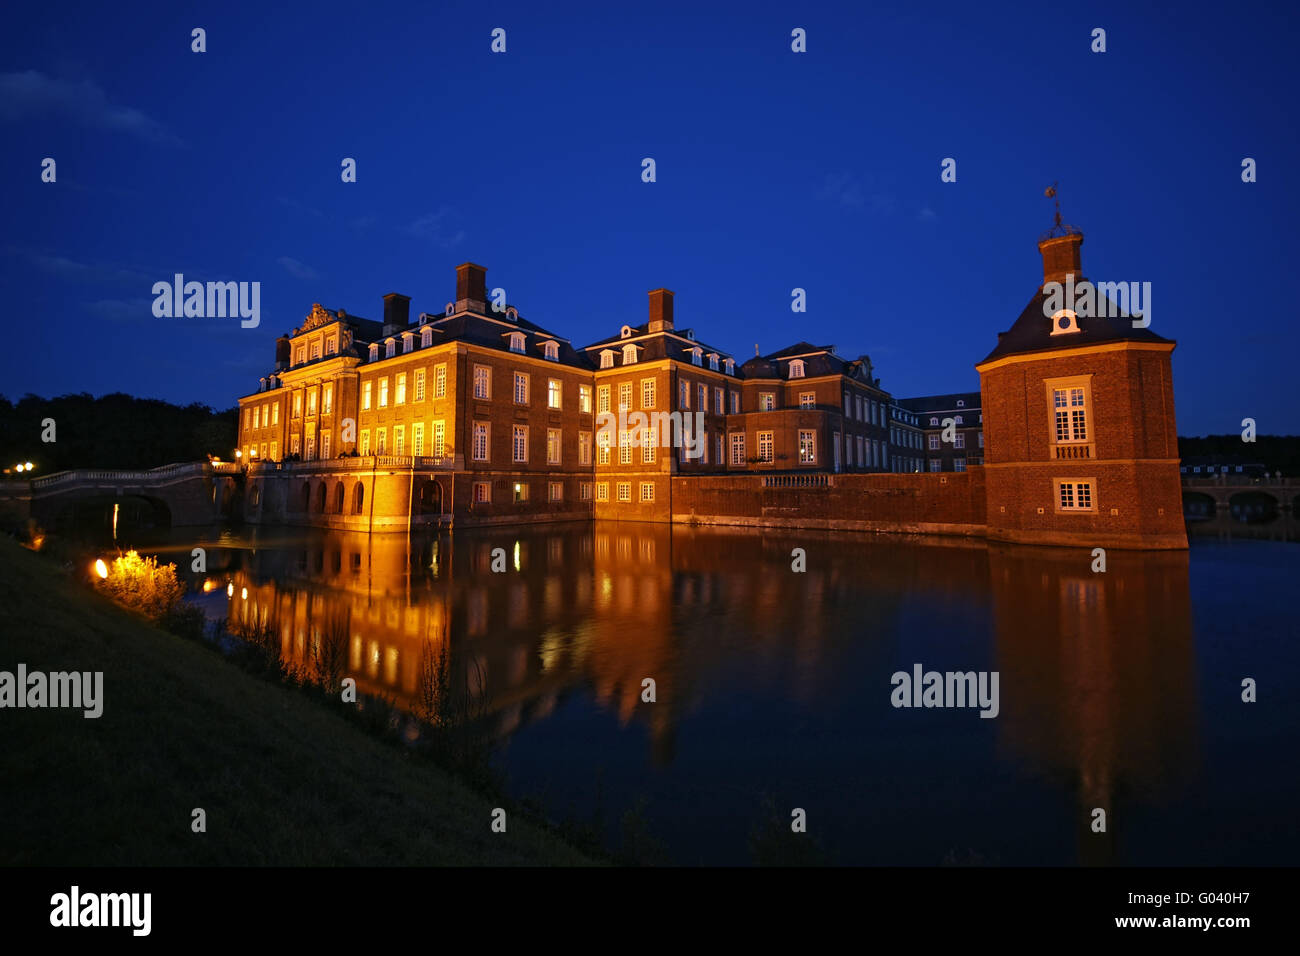 Nightshot of the moated castle Nordkirchen Germany Stock Photo